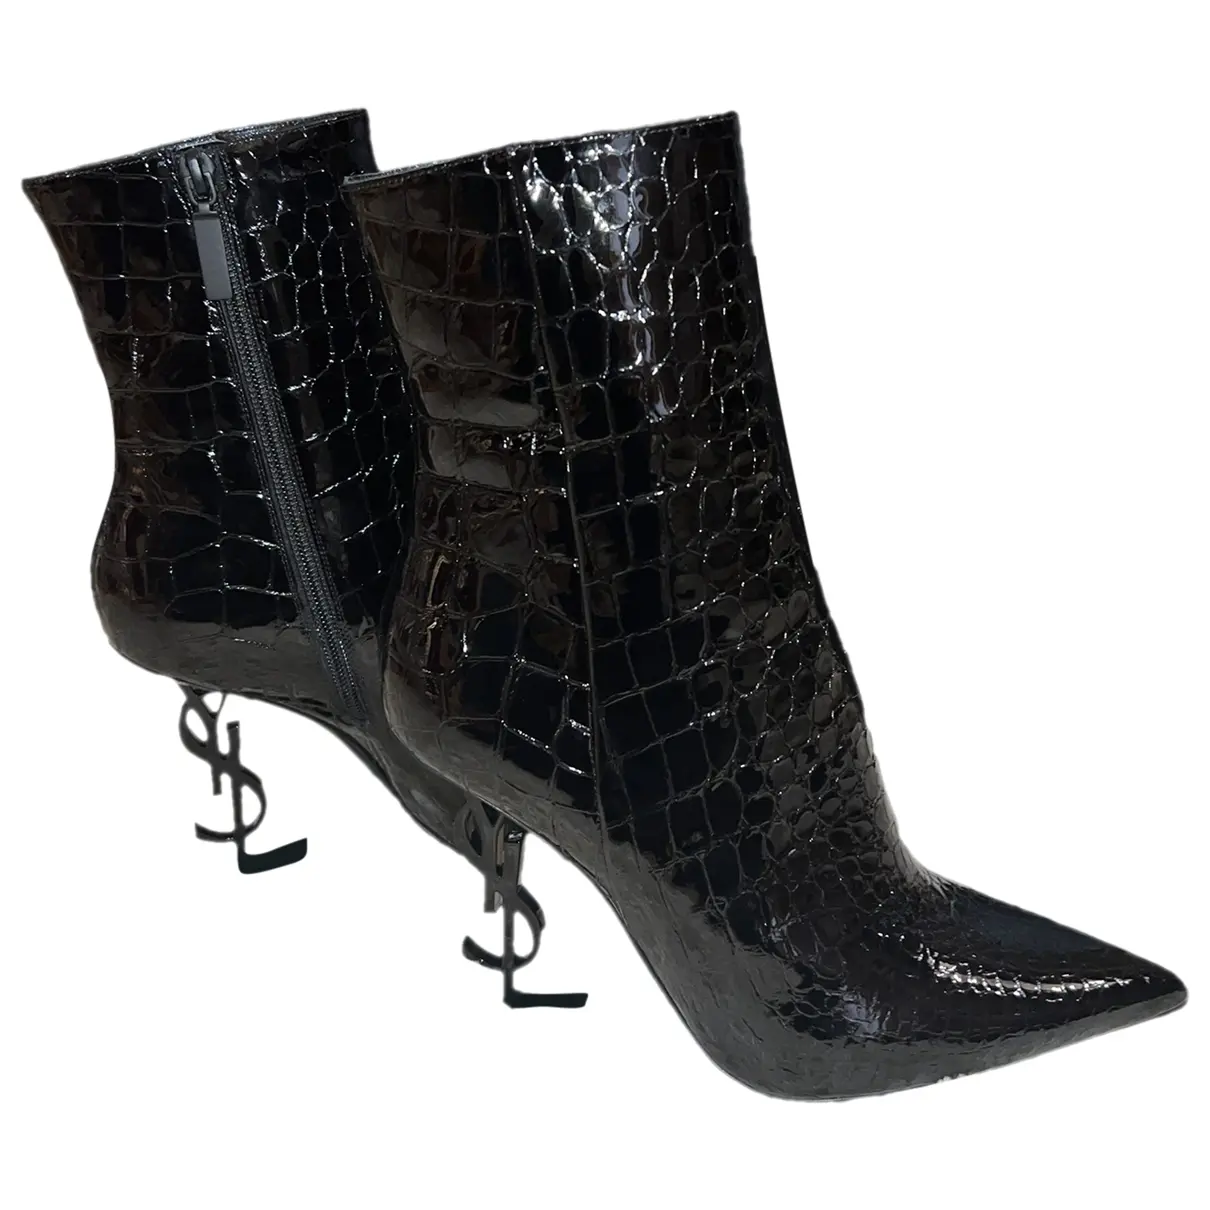 Opyum patent leather ankle boots